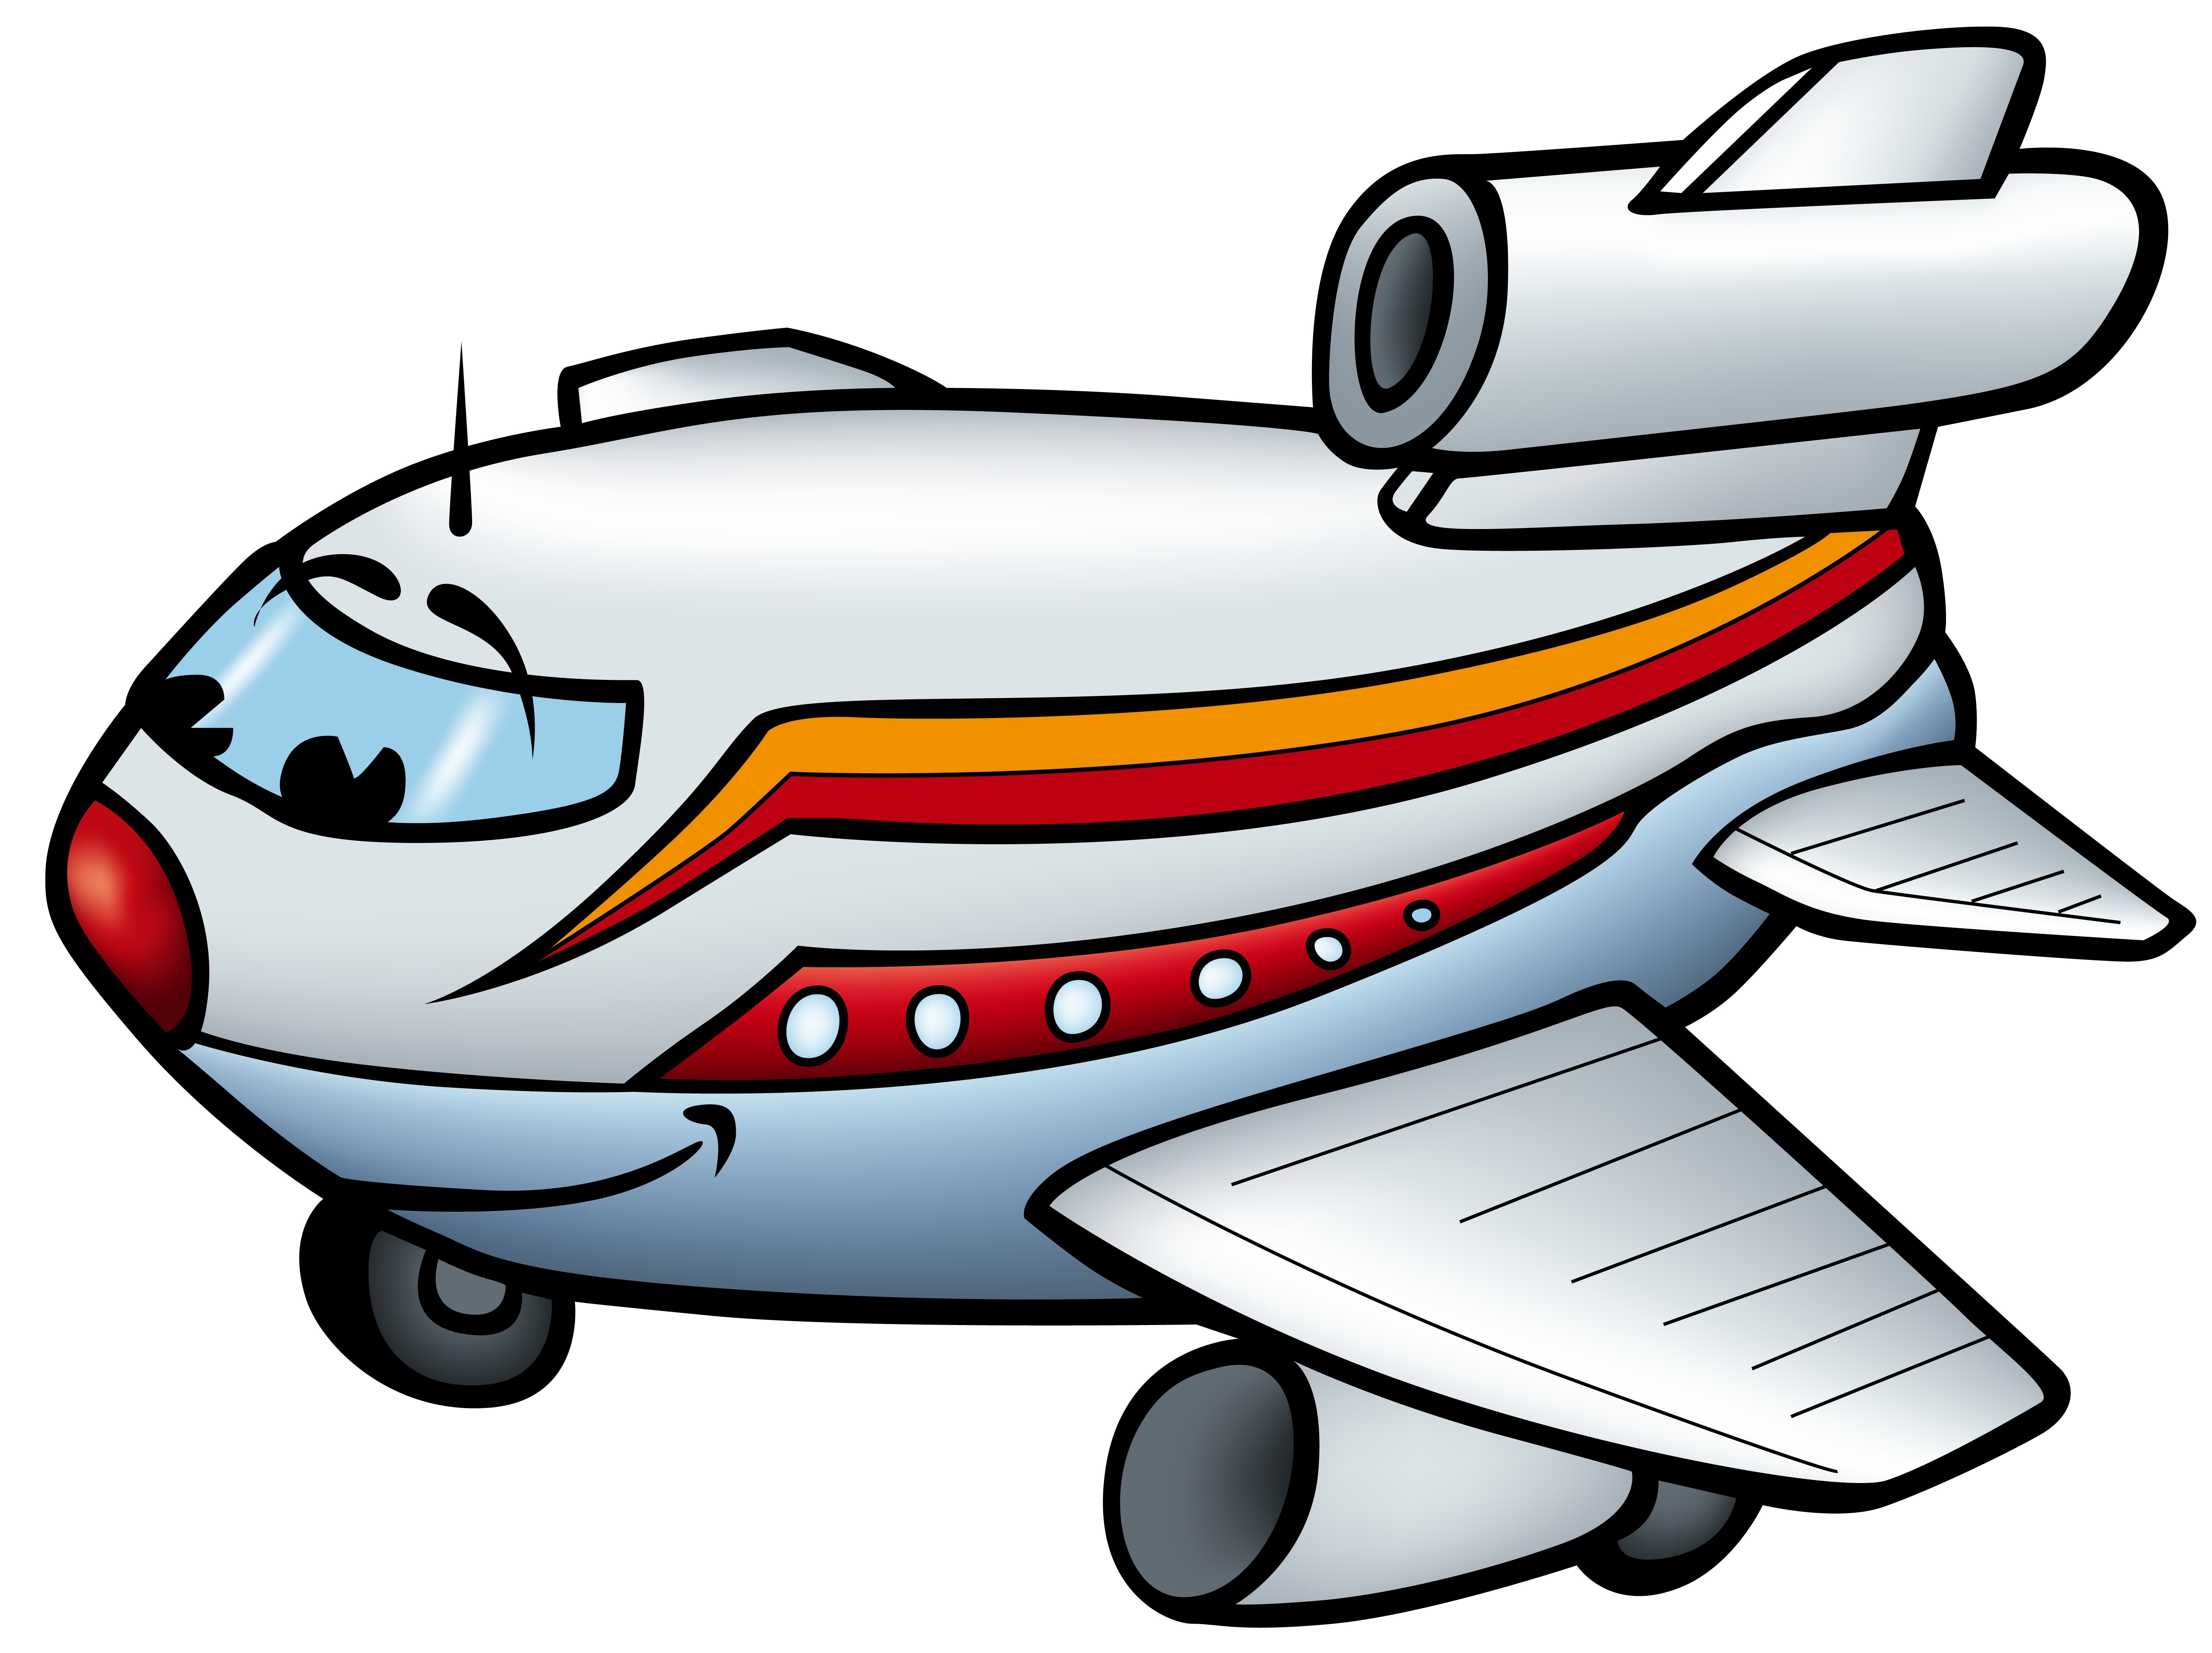 airplane animated clip art